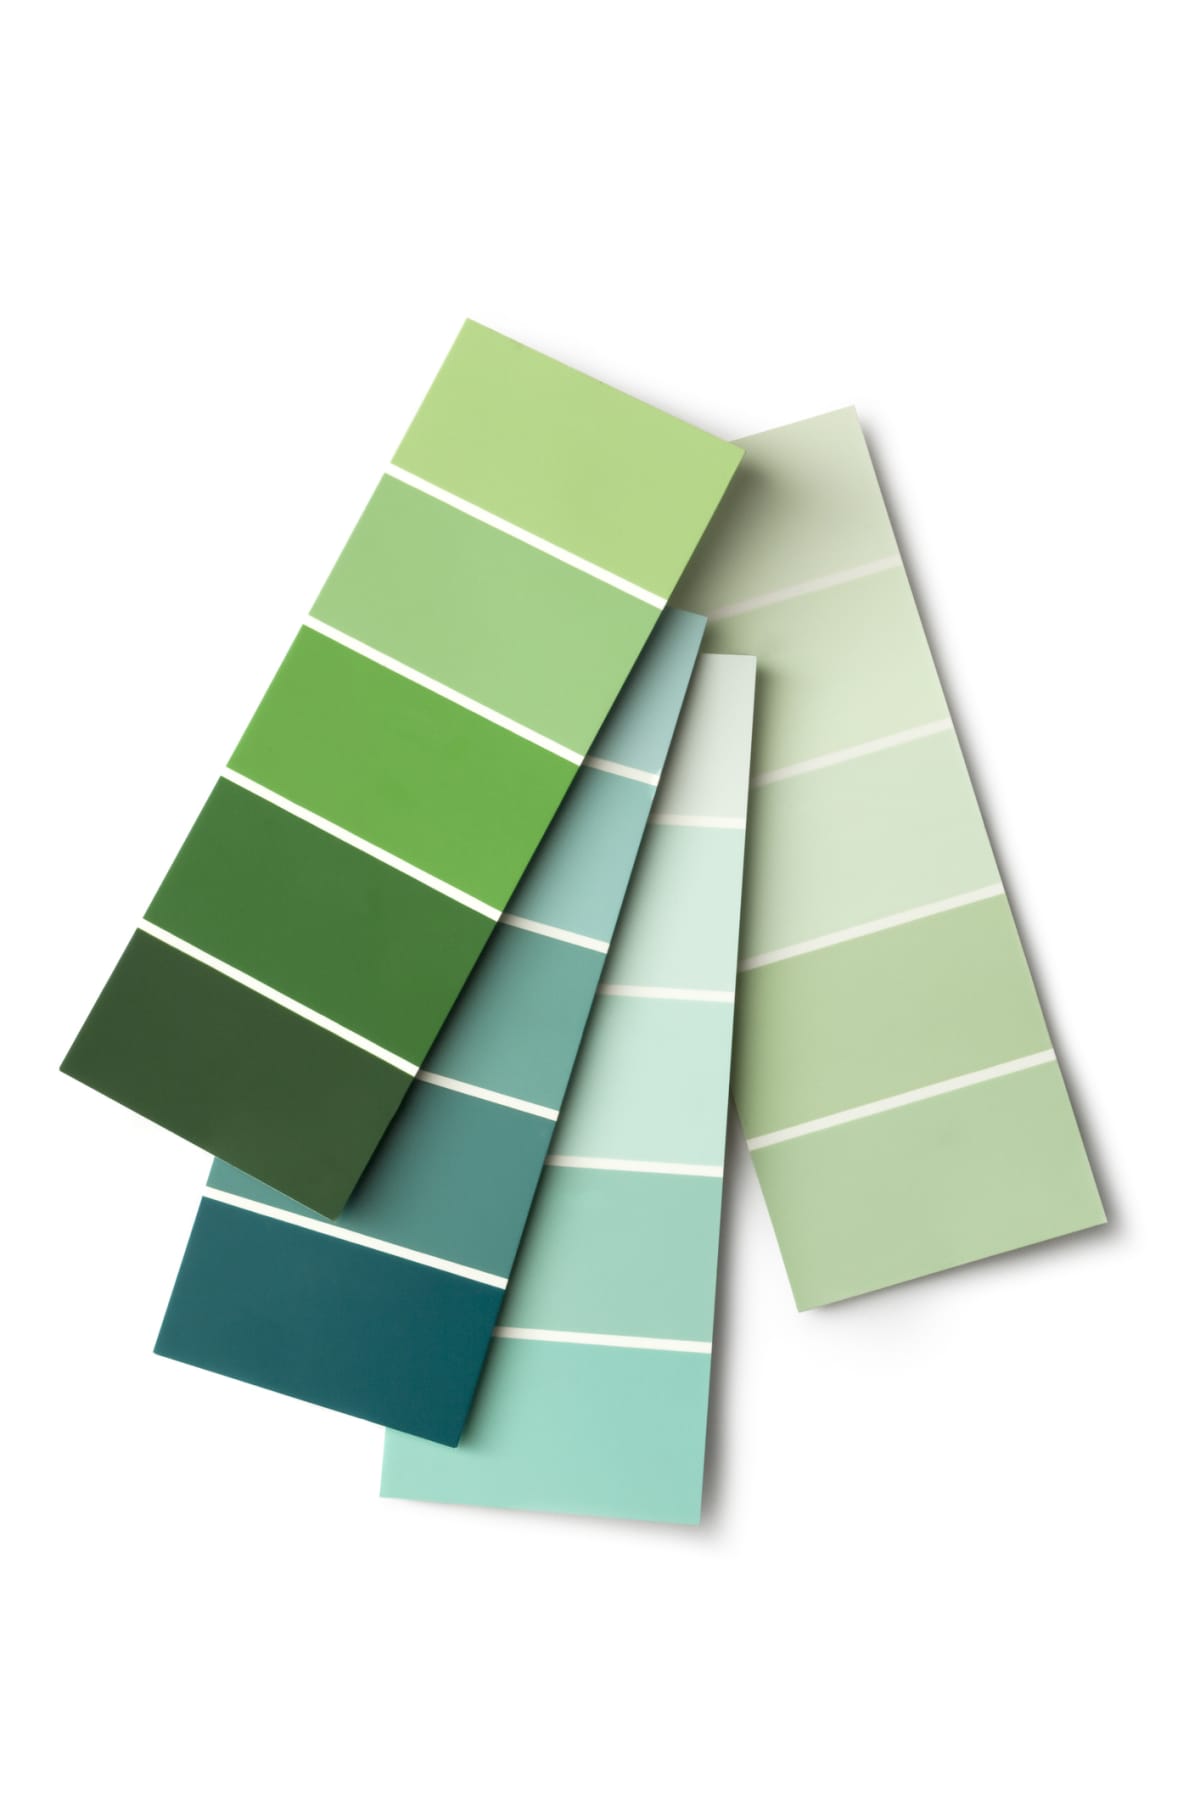 Green paint swatches